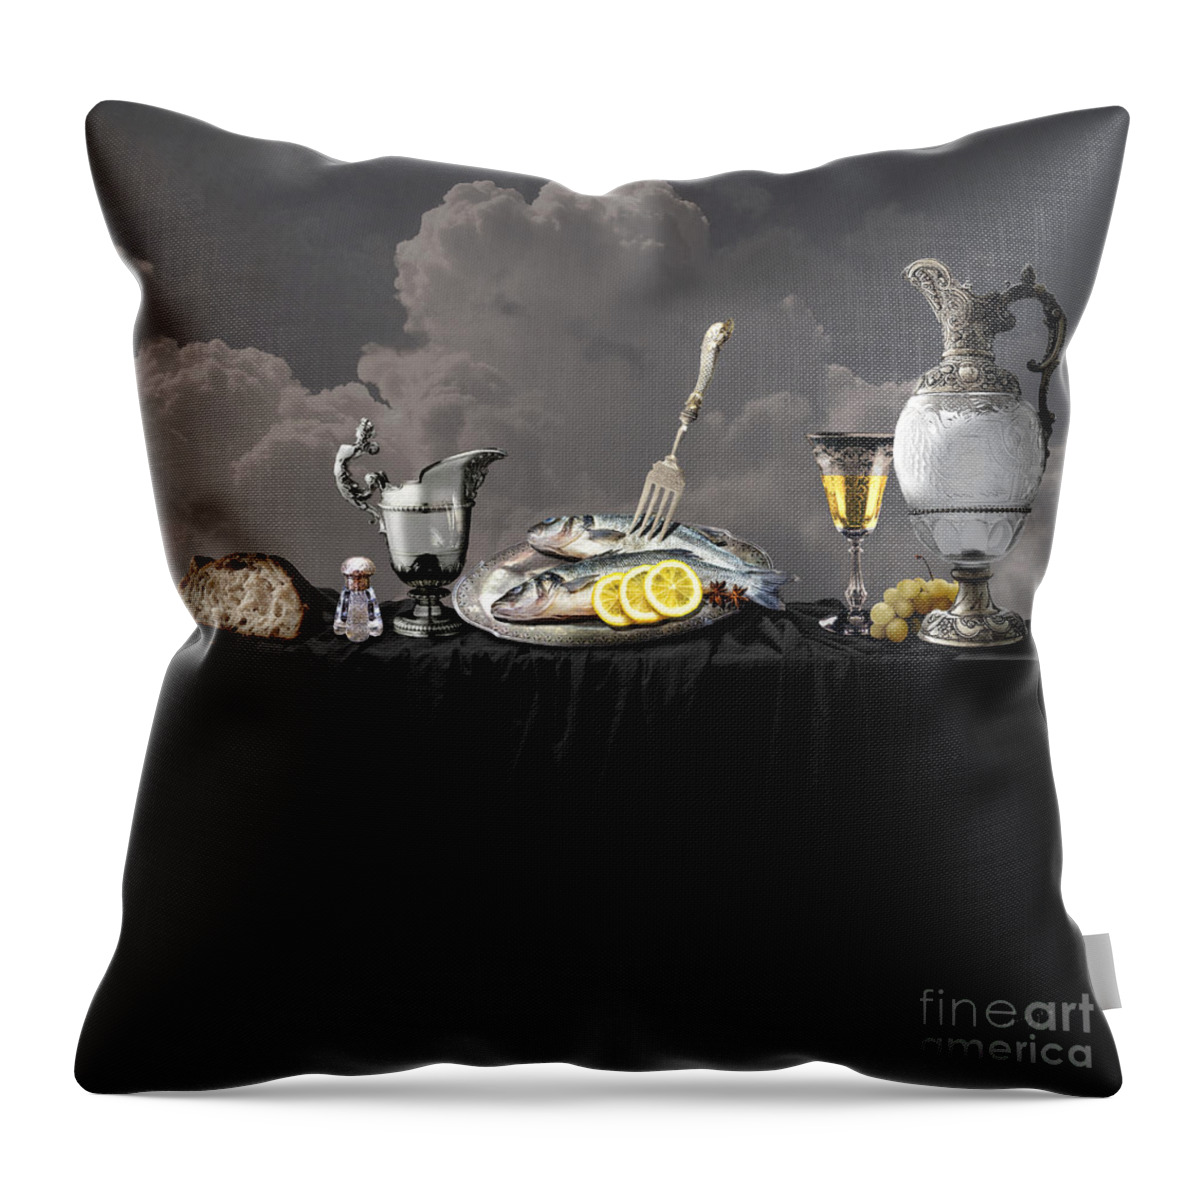 Realism Throw Pillow featuring the digital art Fish diner in silver by Alexa Szlavics